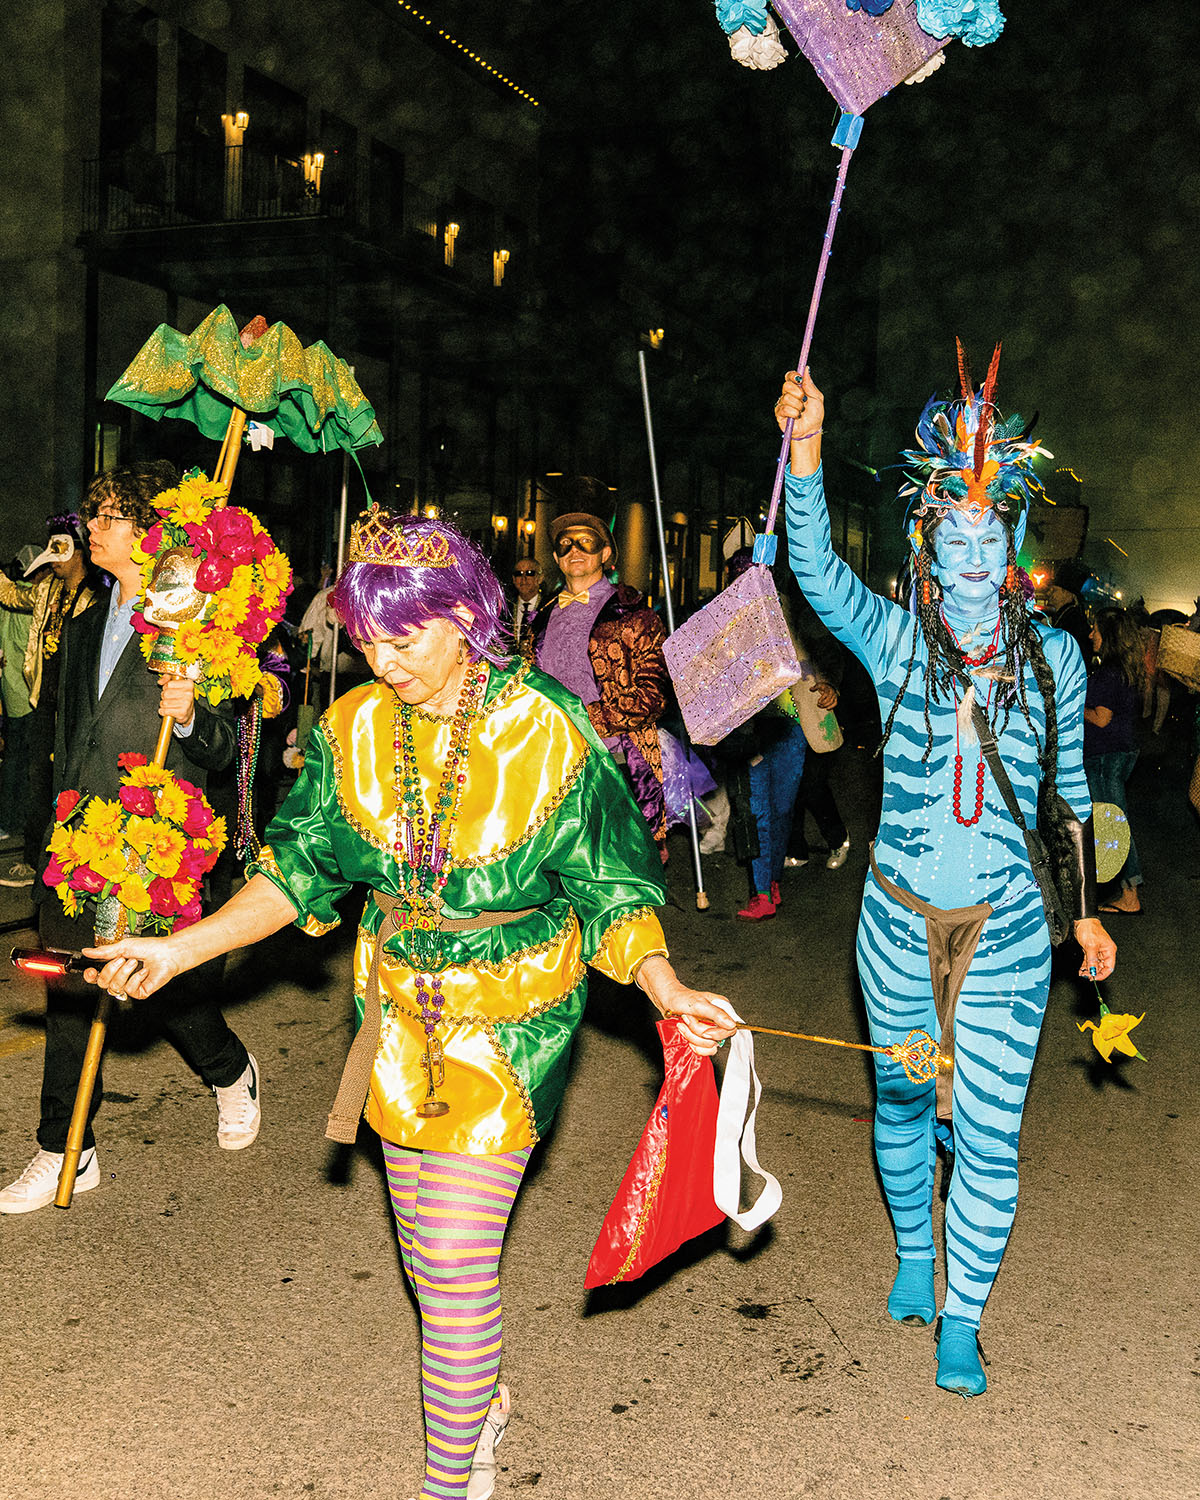 More people in costumes walking in a parade--including a bright green, gold and purple costume and one that is bright blue with animal stripes